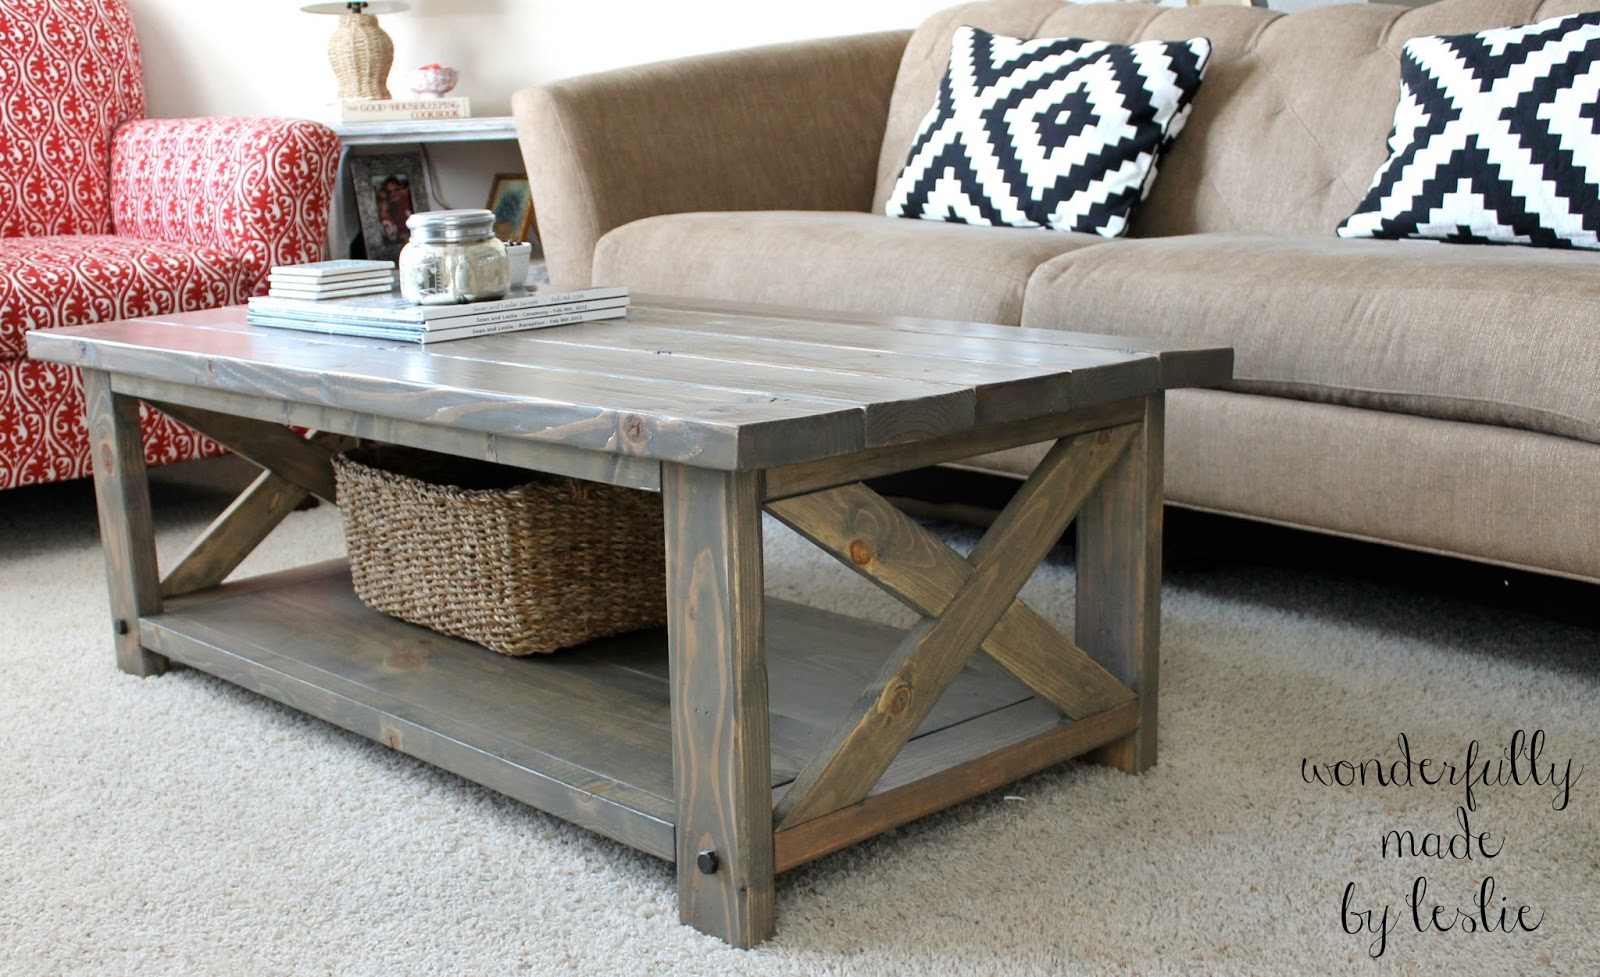 Wonderfully Made: Finished {DIY} Coffee Table